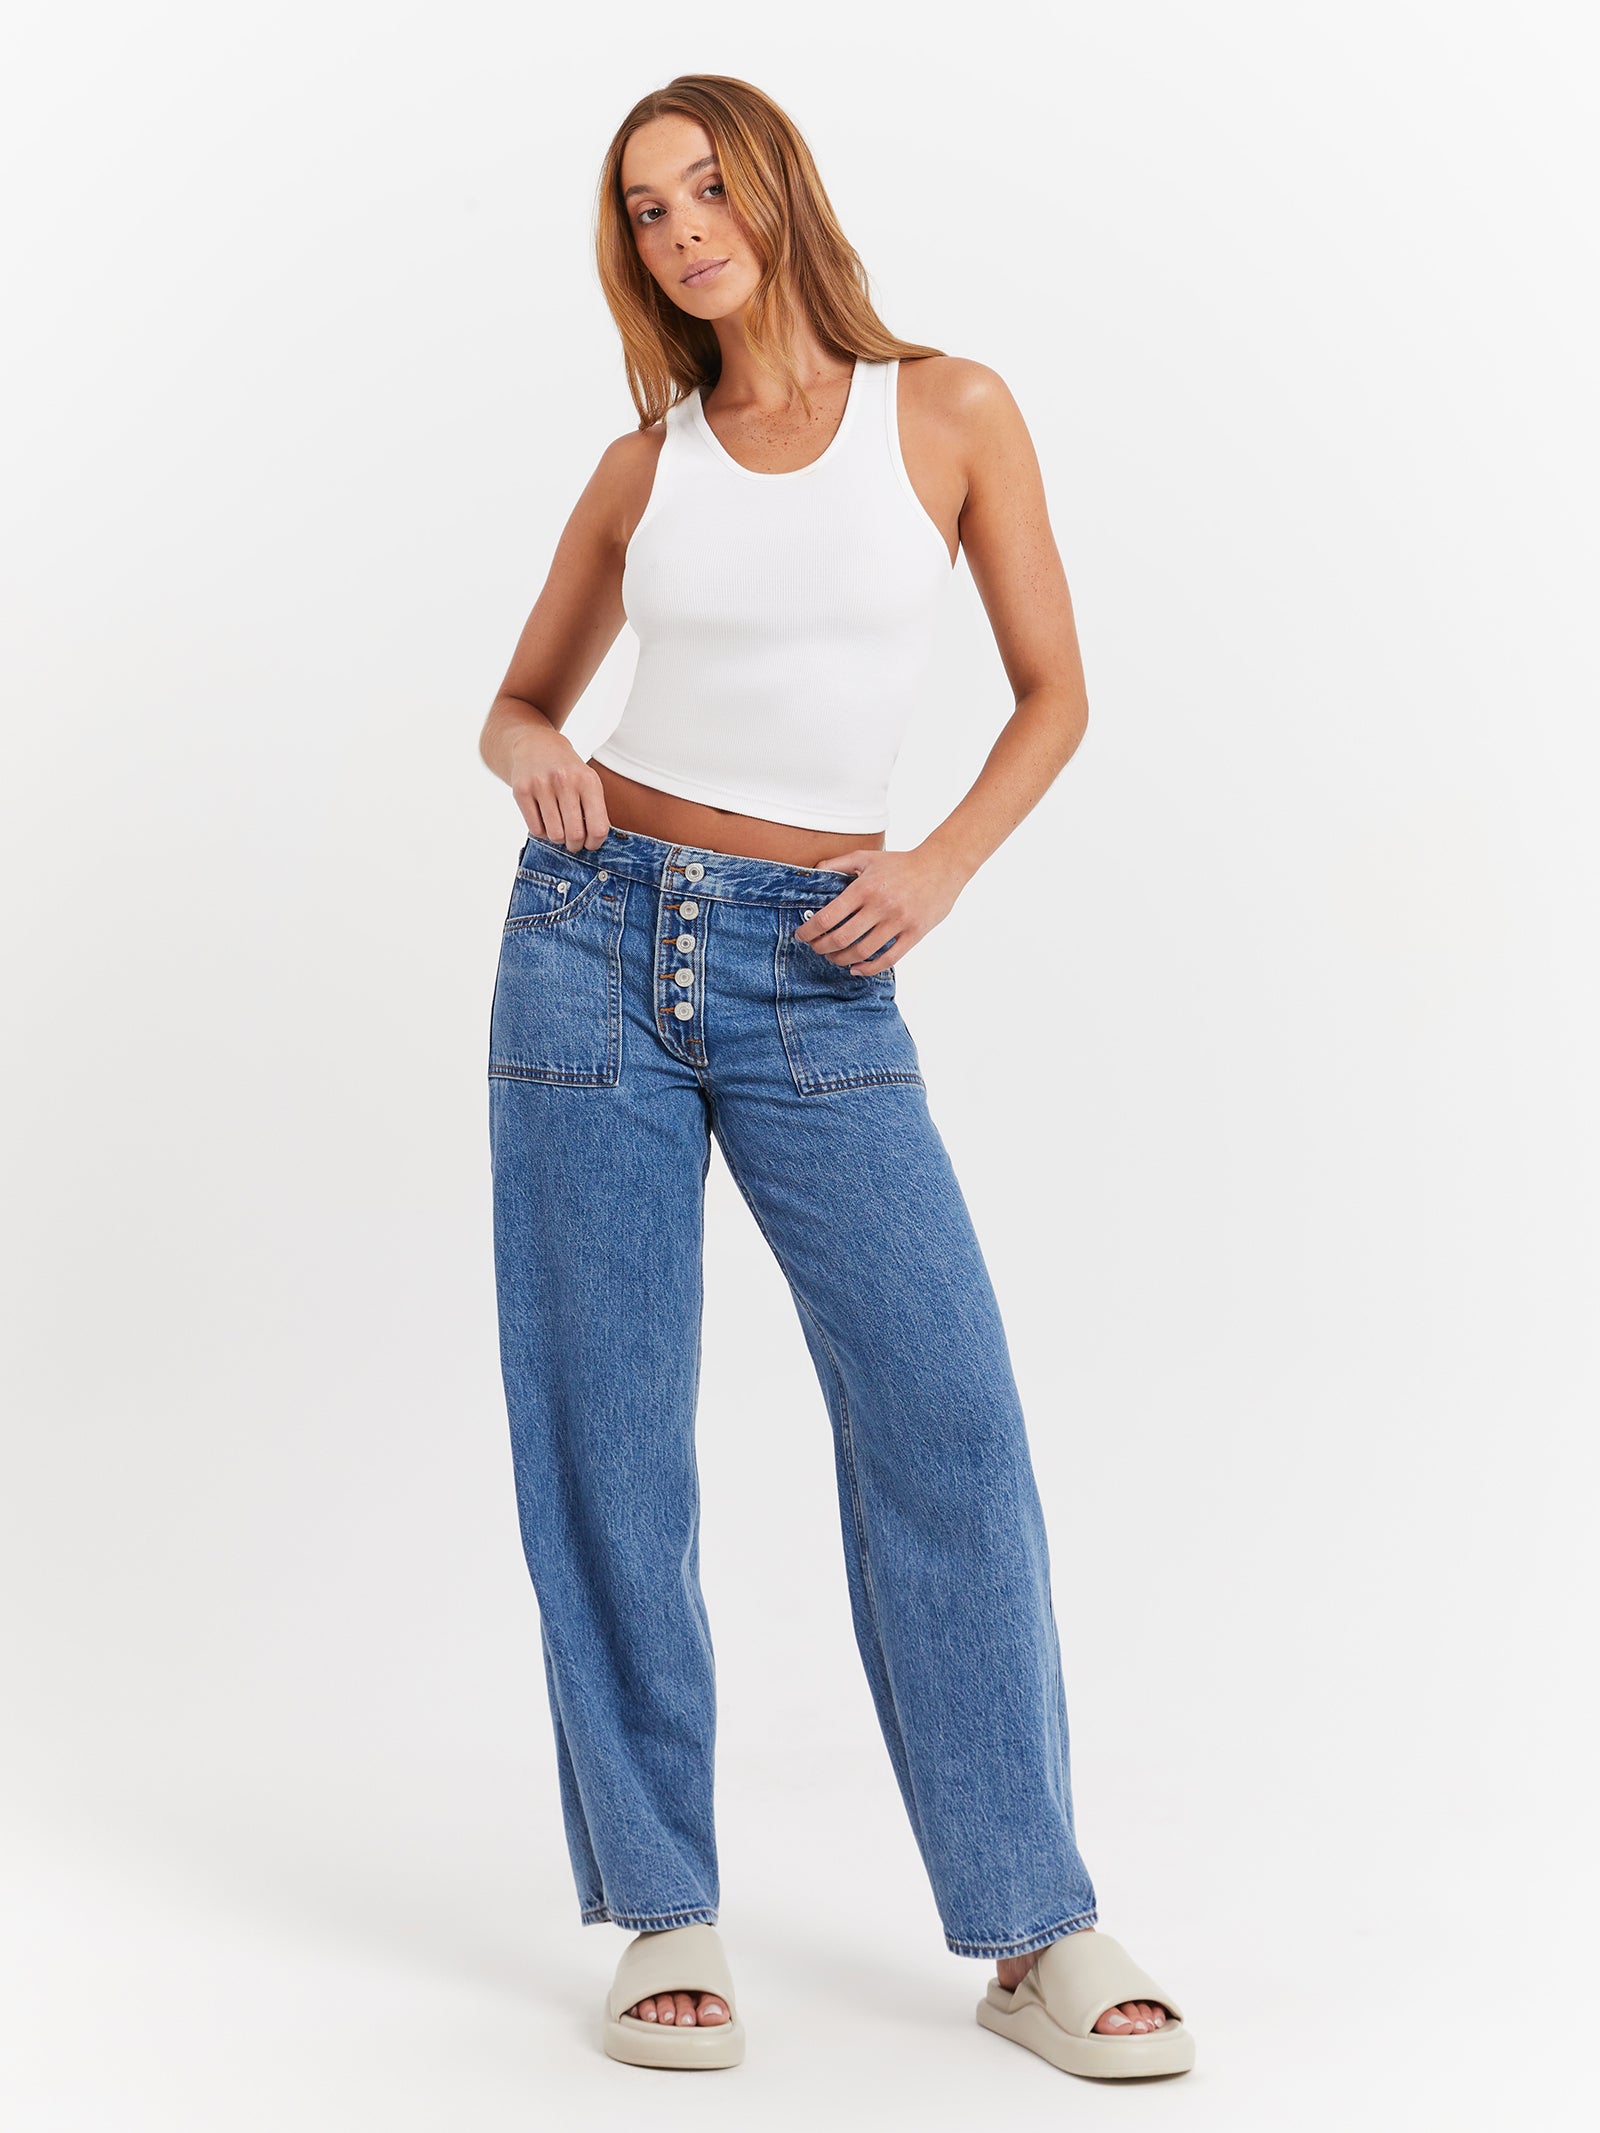 Reversible Baggy Dad Jeans in Soft As Butter Medium Blue